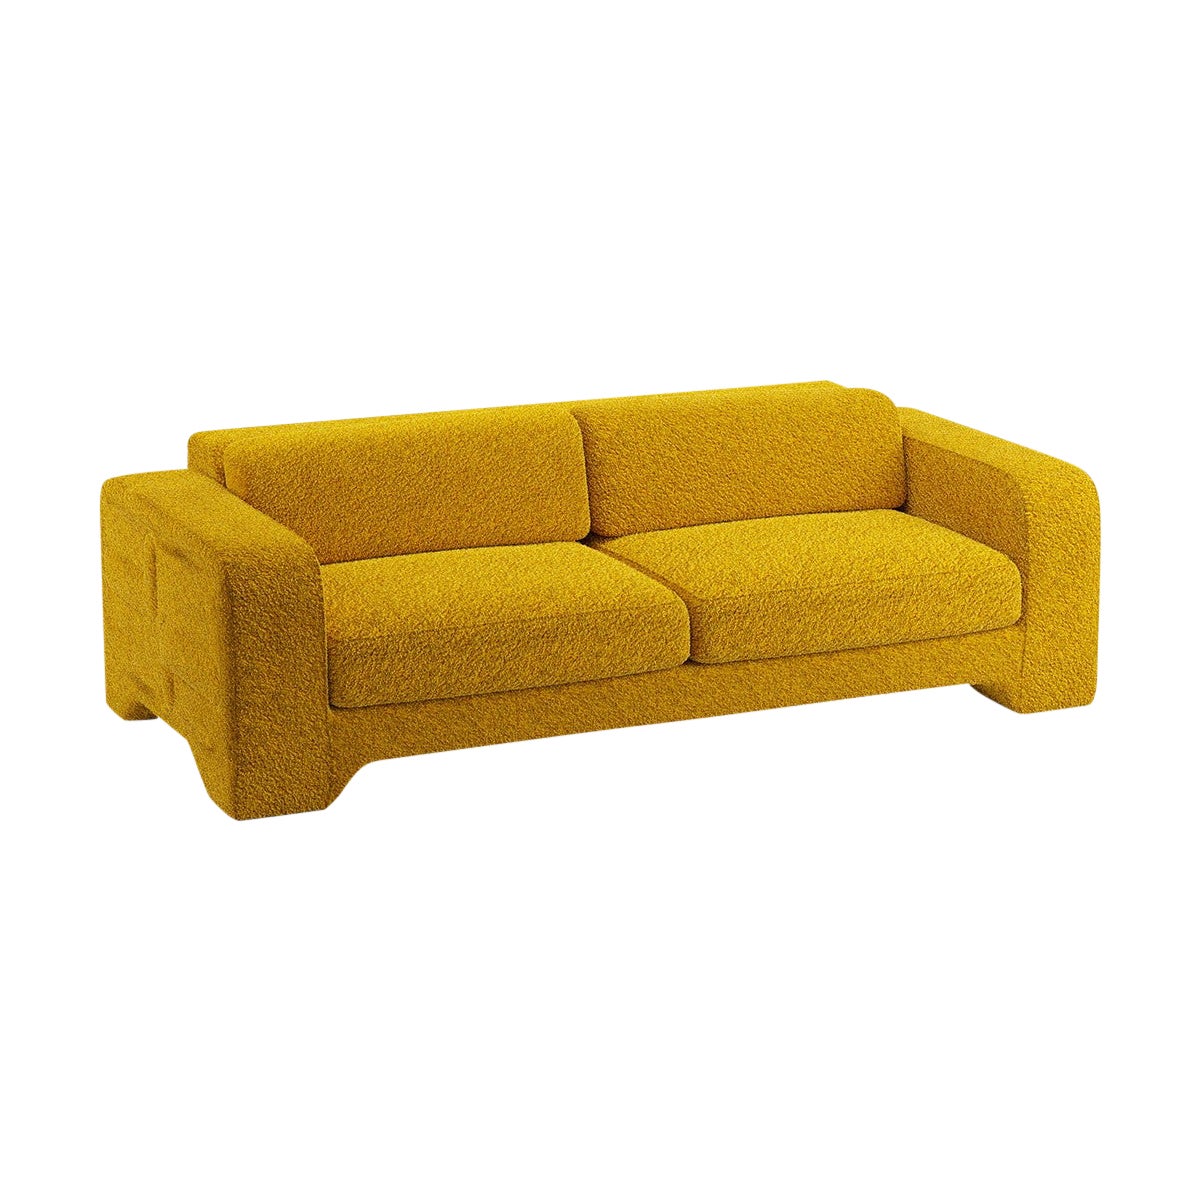 Popus Editions Giovanna 2.5 Seater Sofa in Amber Athena Loop Yarn Fabric For Sale